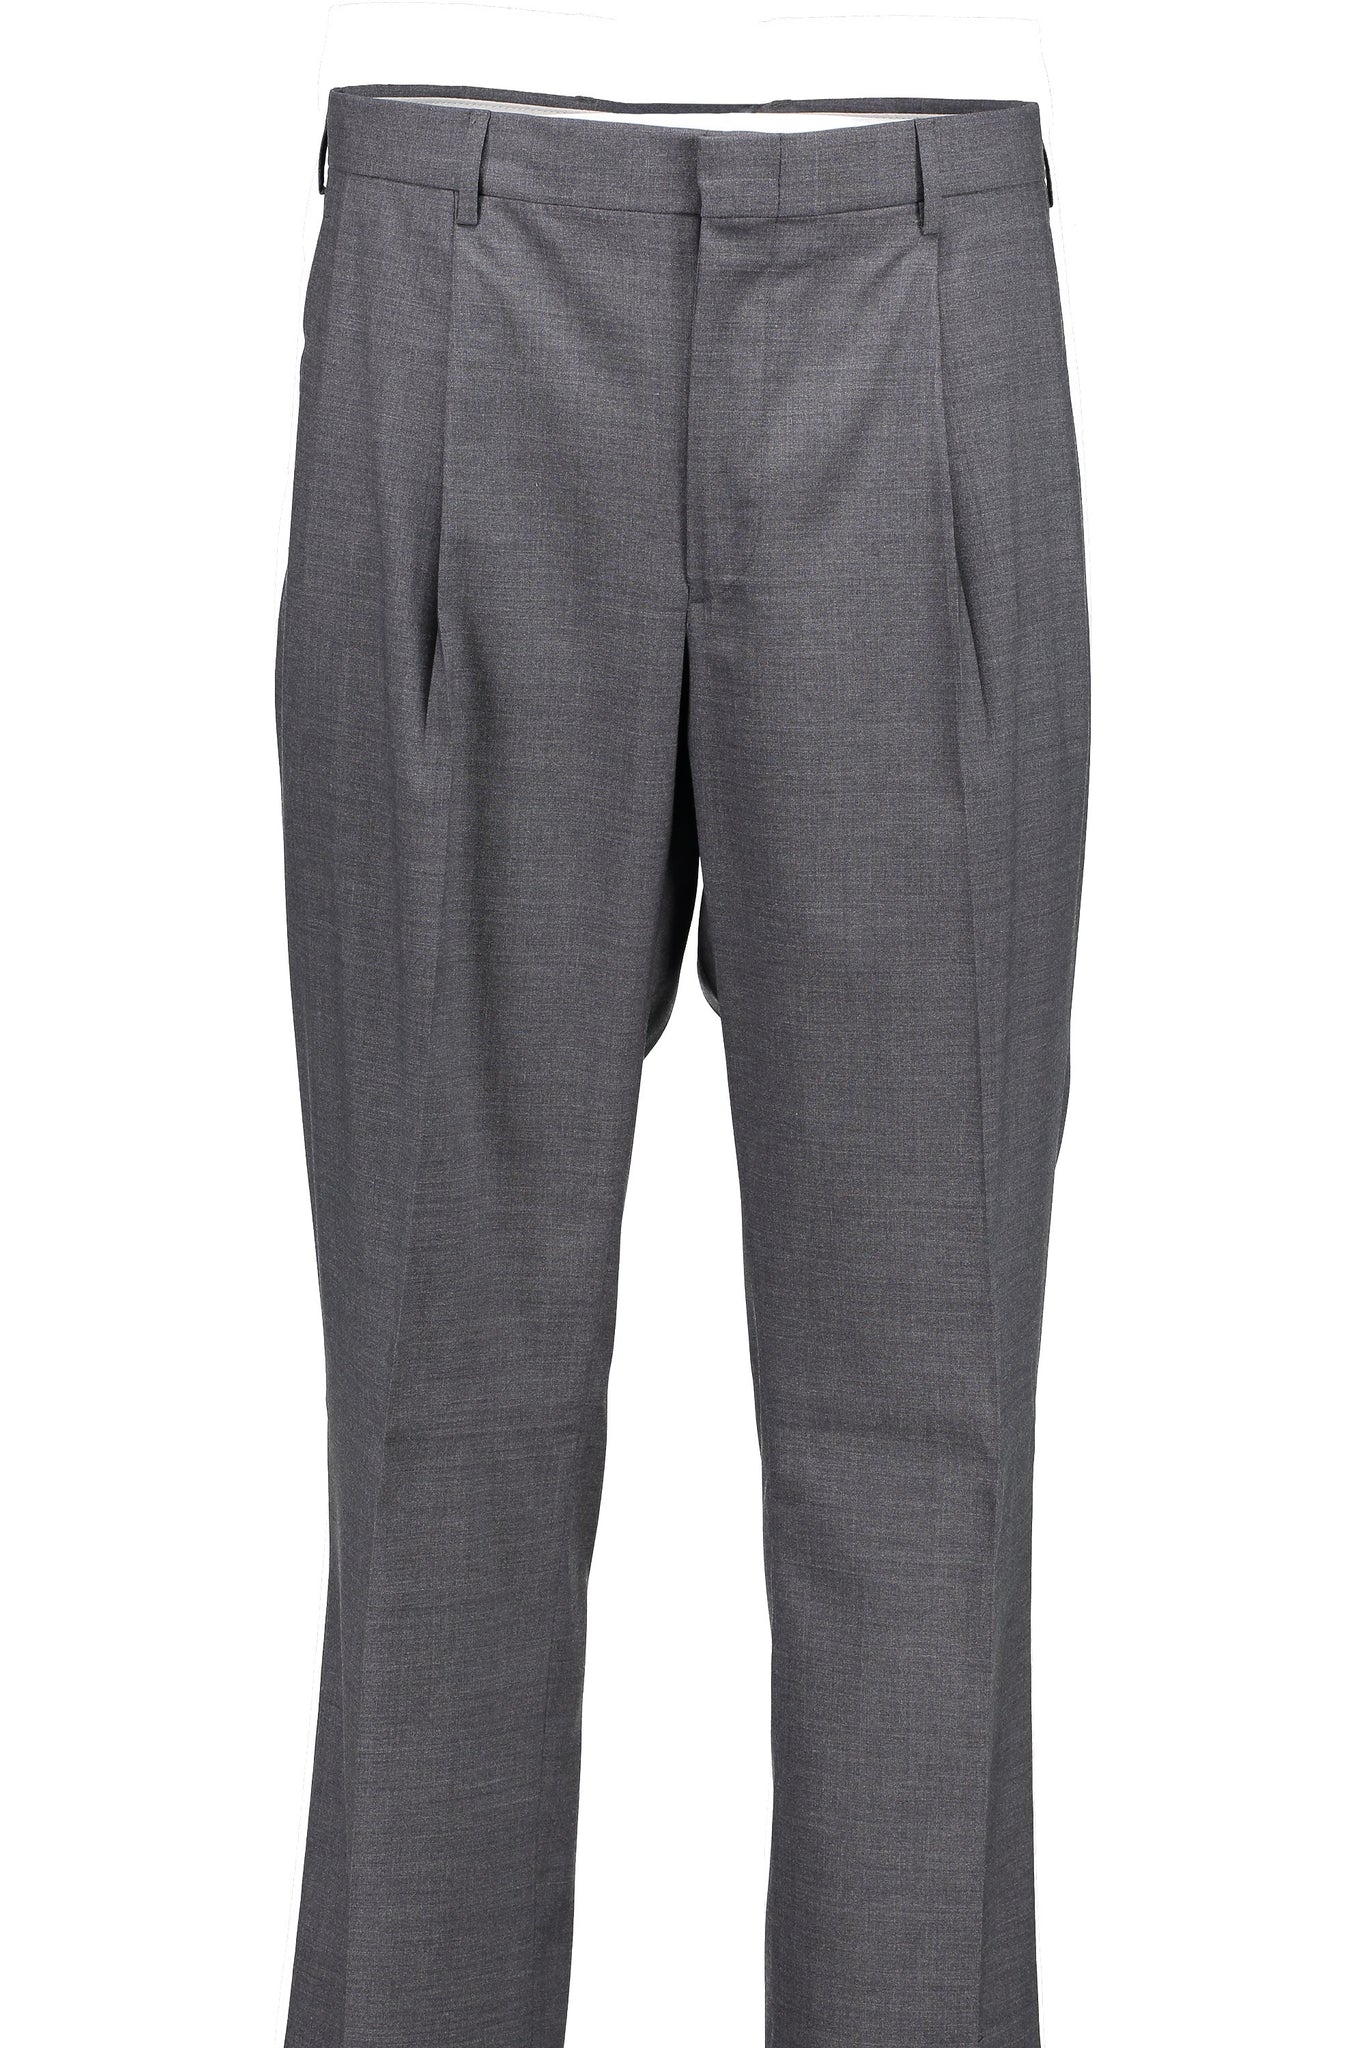 Pleated Suit Trousers - Grey Flannel, Men's Trousers